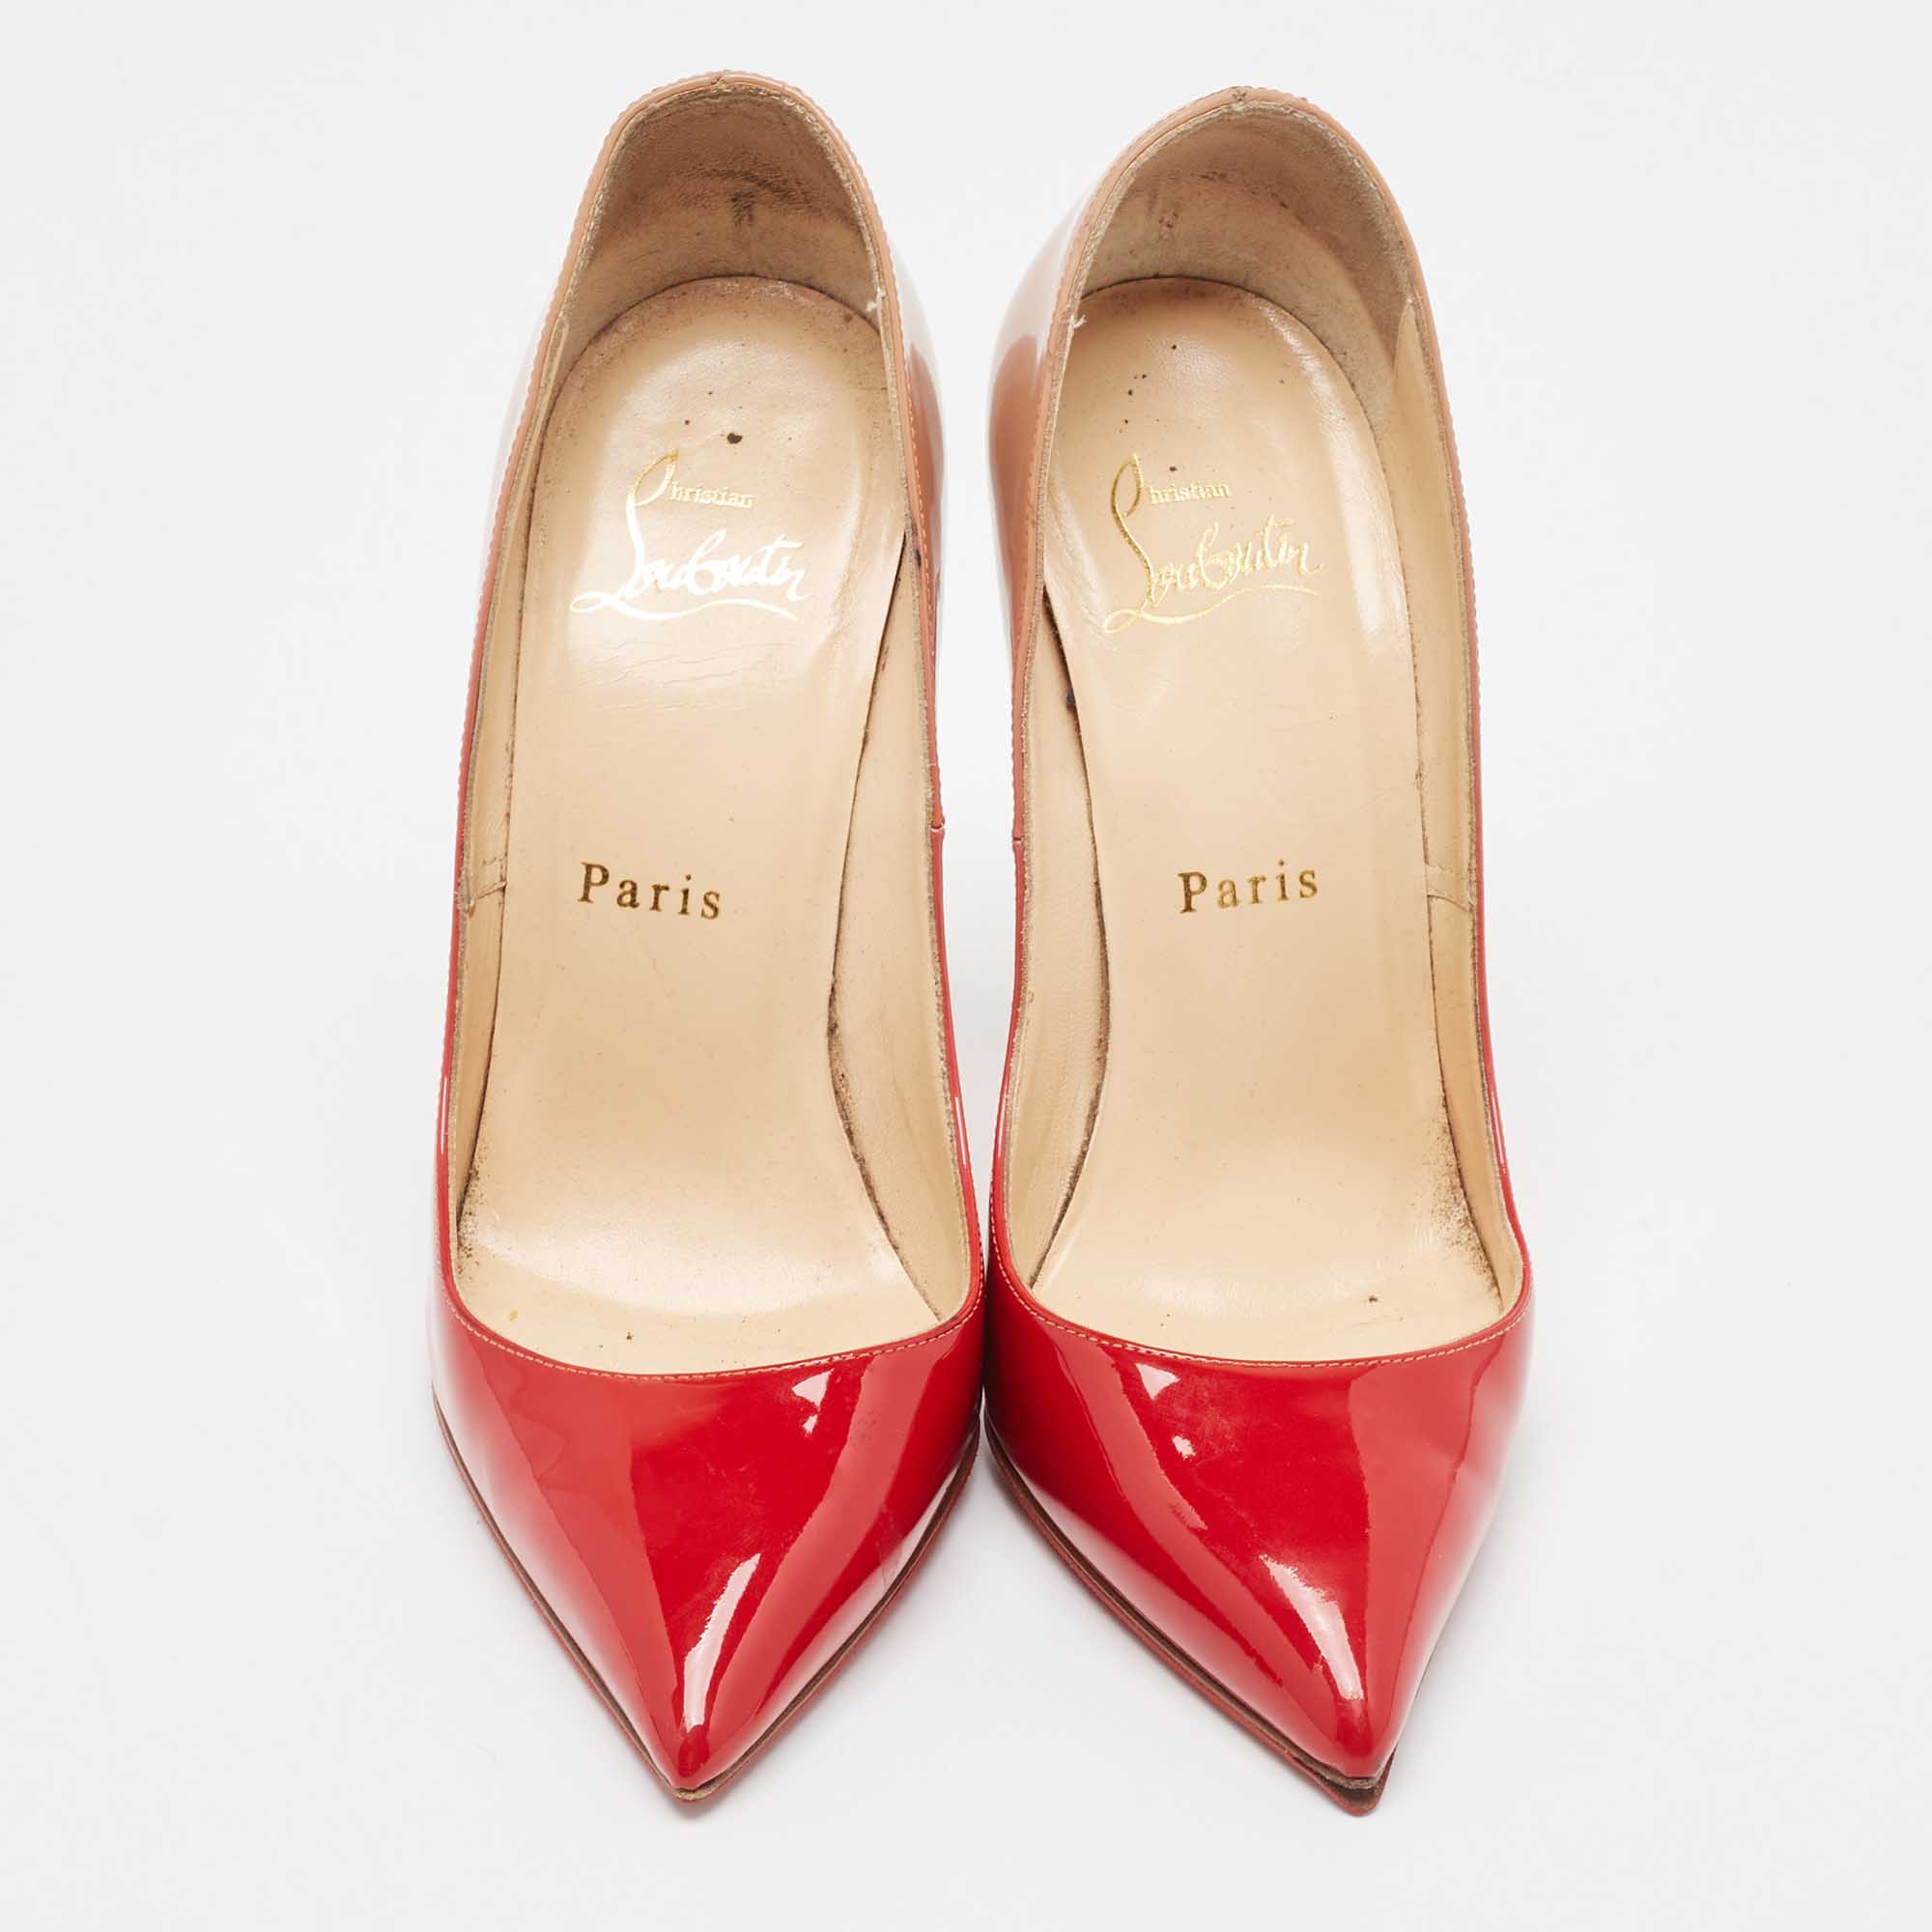 Christian Louboutin Red/Beige Ombre Patent Leather So Kate Pumps Size 36